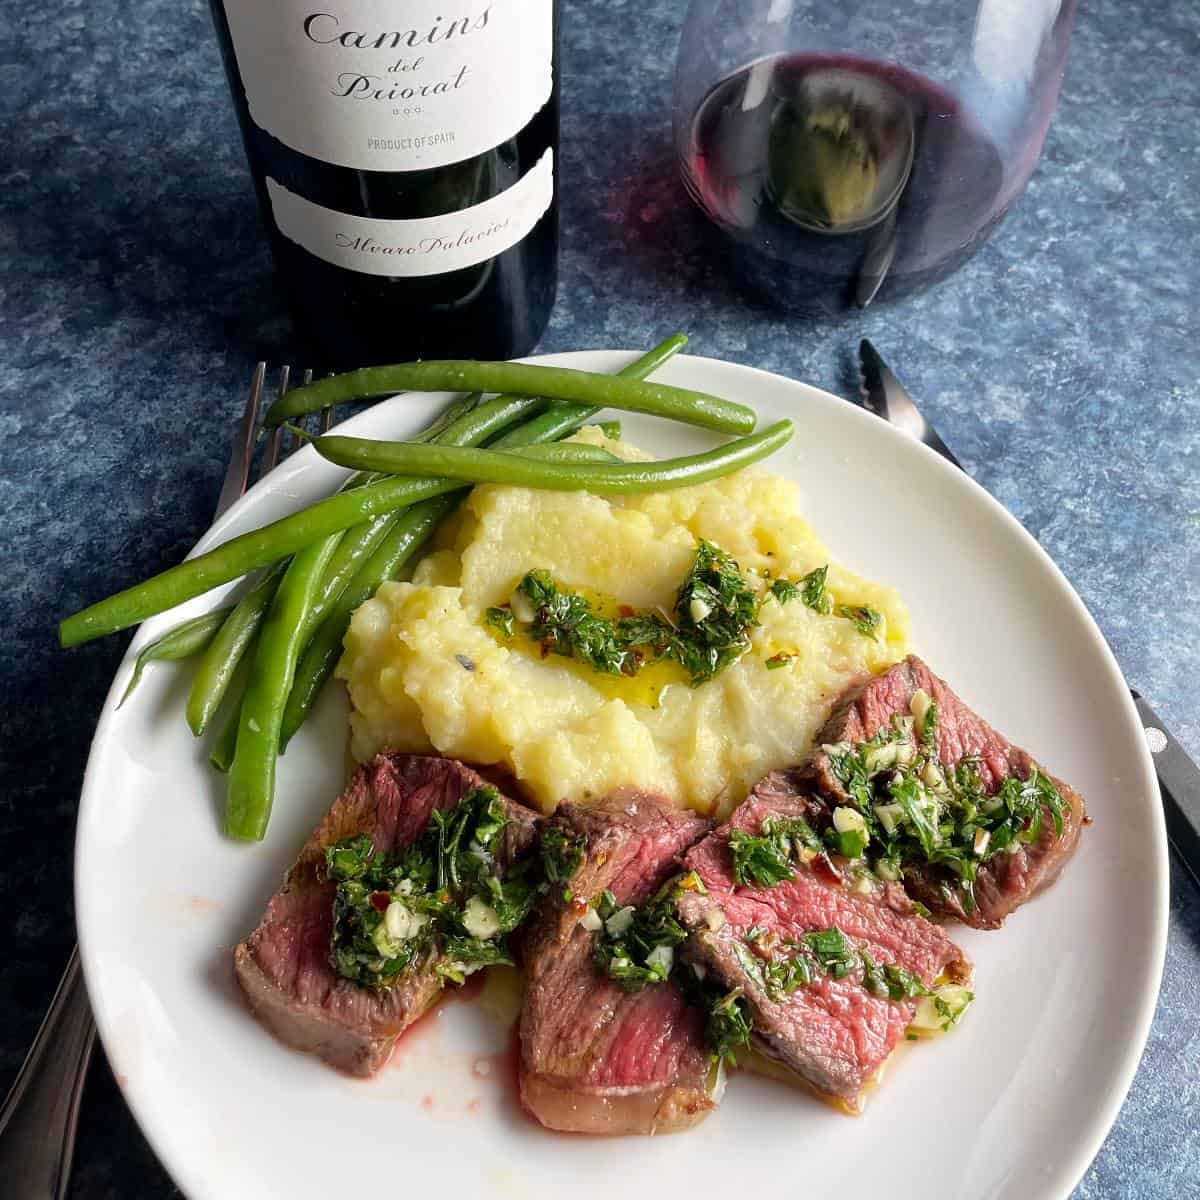 slices of medium rare steak topped with carrot top chimichurri, served with mashed potatoes, green beans and red wine.